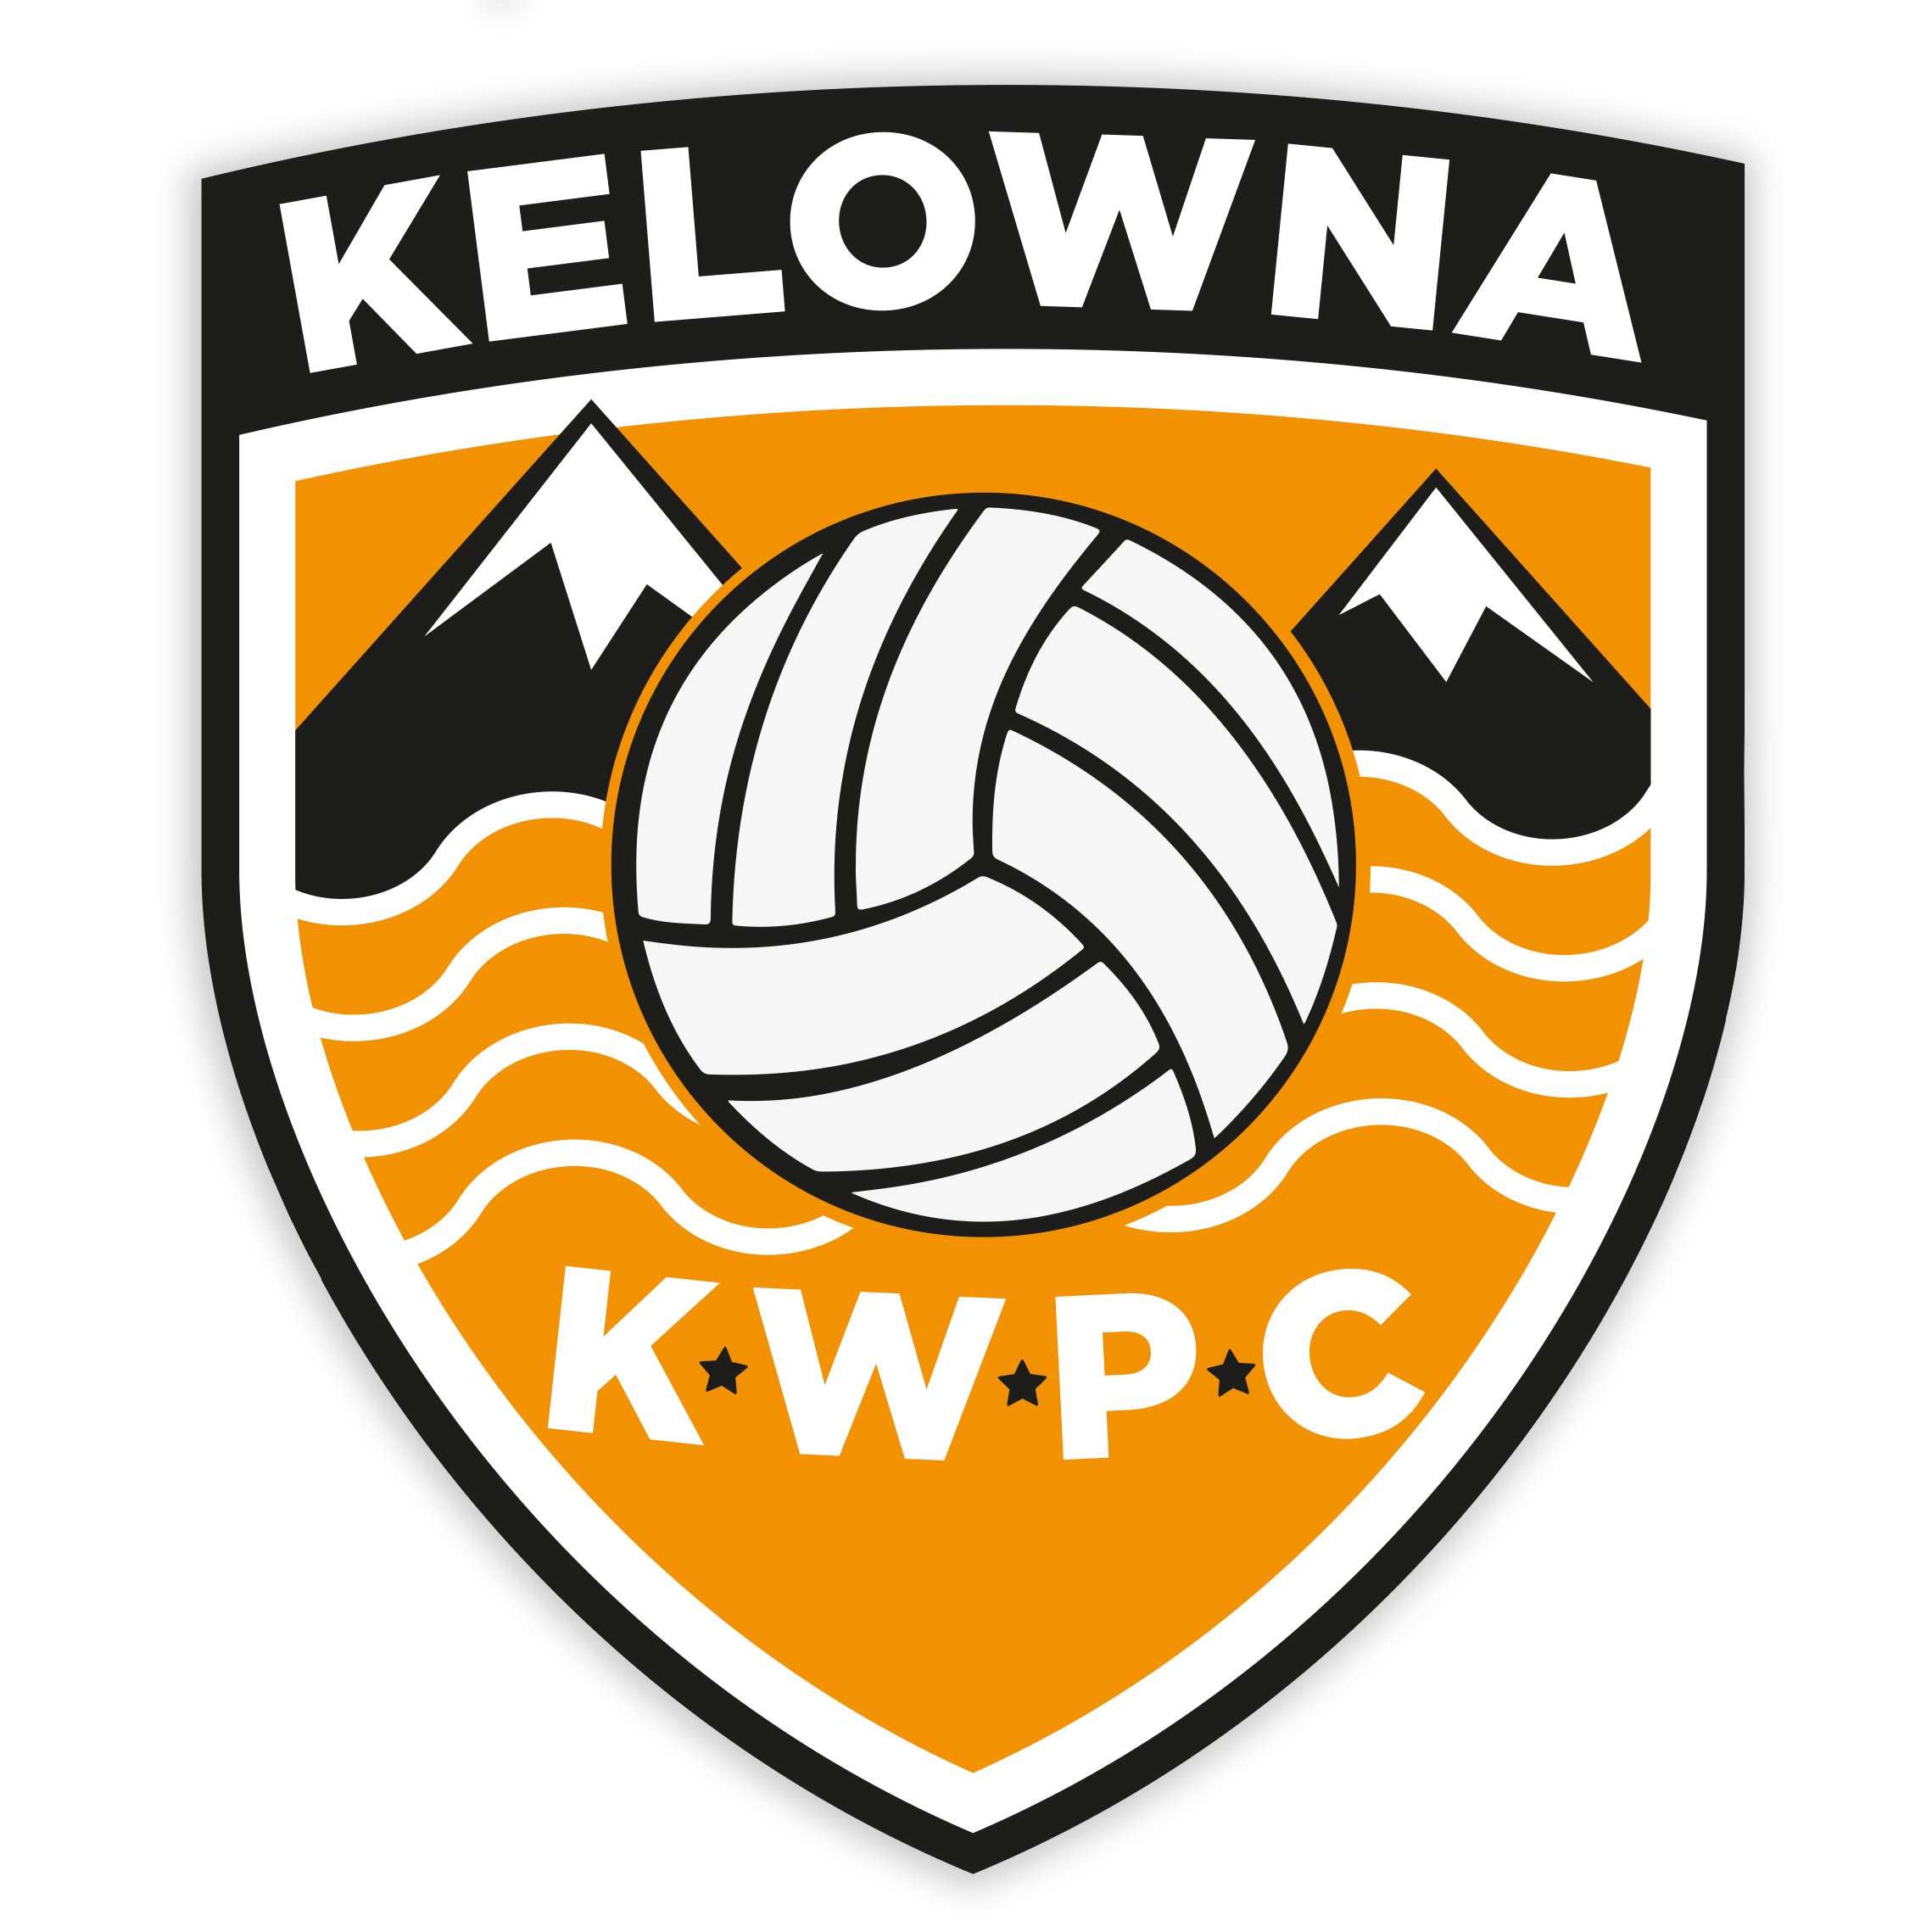 Water Polo Swim Lessons in Kelowna - Youth Water Polo Swim Team - 7 to 8.30pm